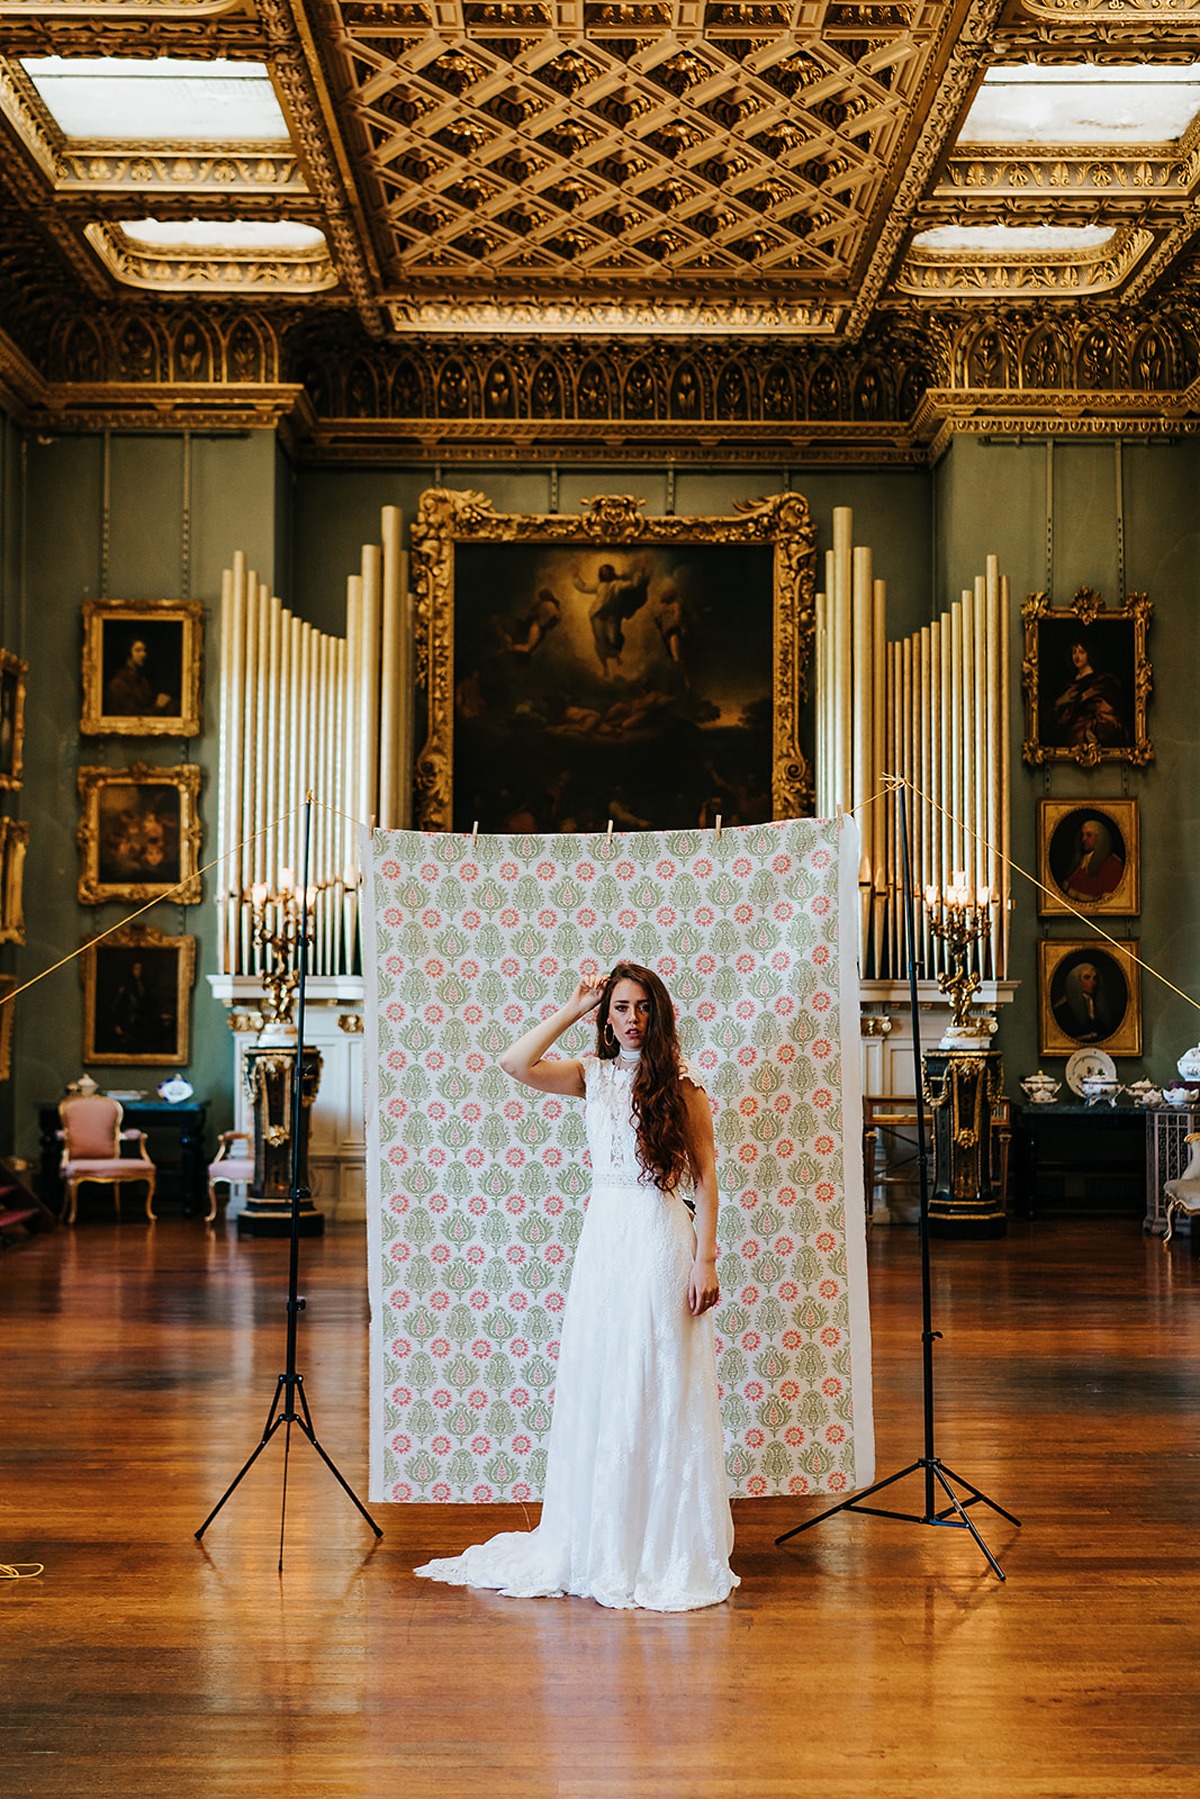 Fall vintage wedding ideas at the Somerley House in the UK